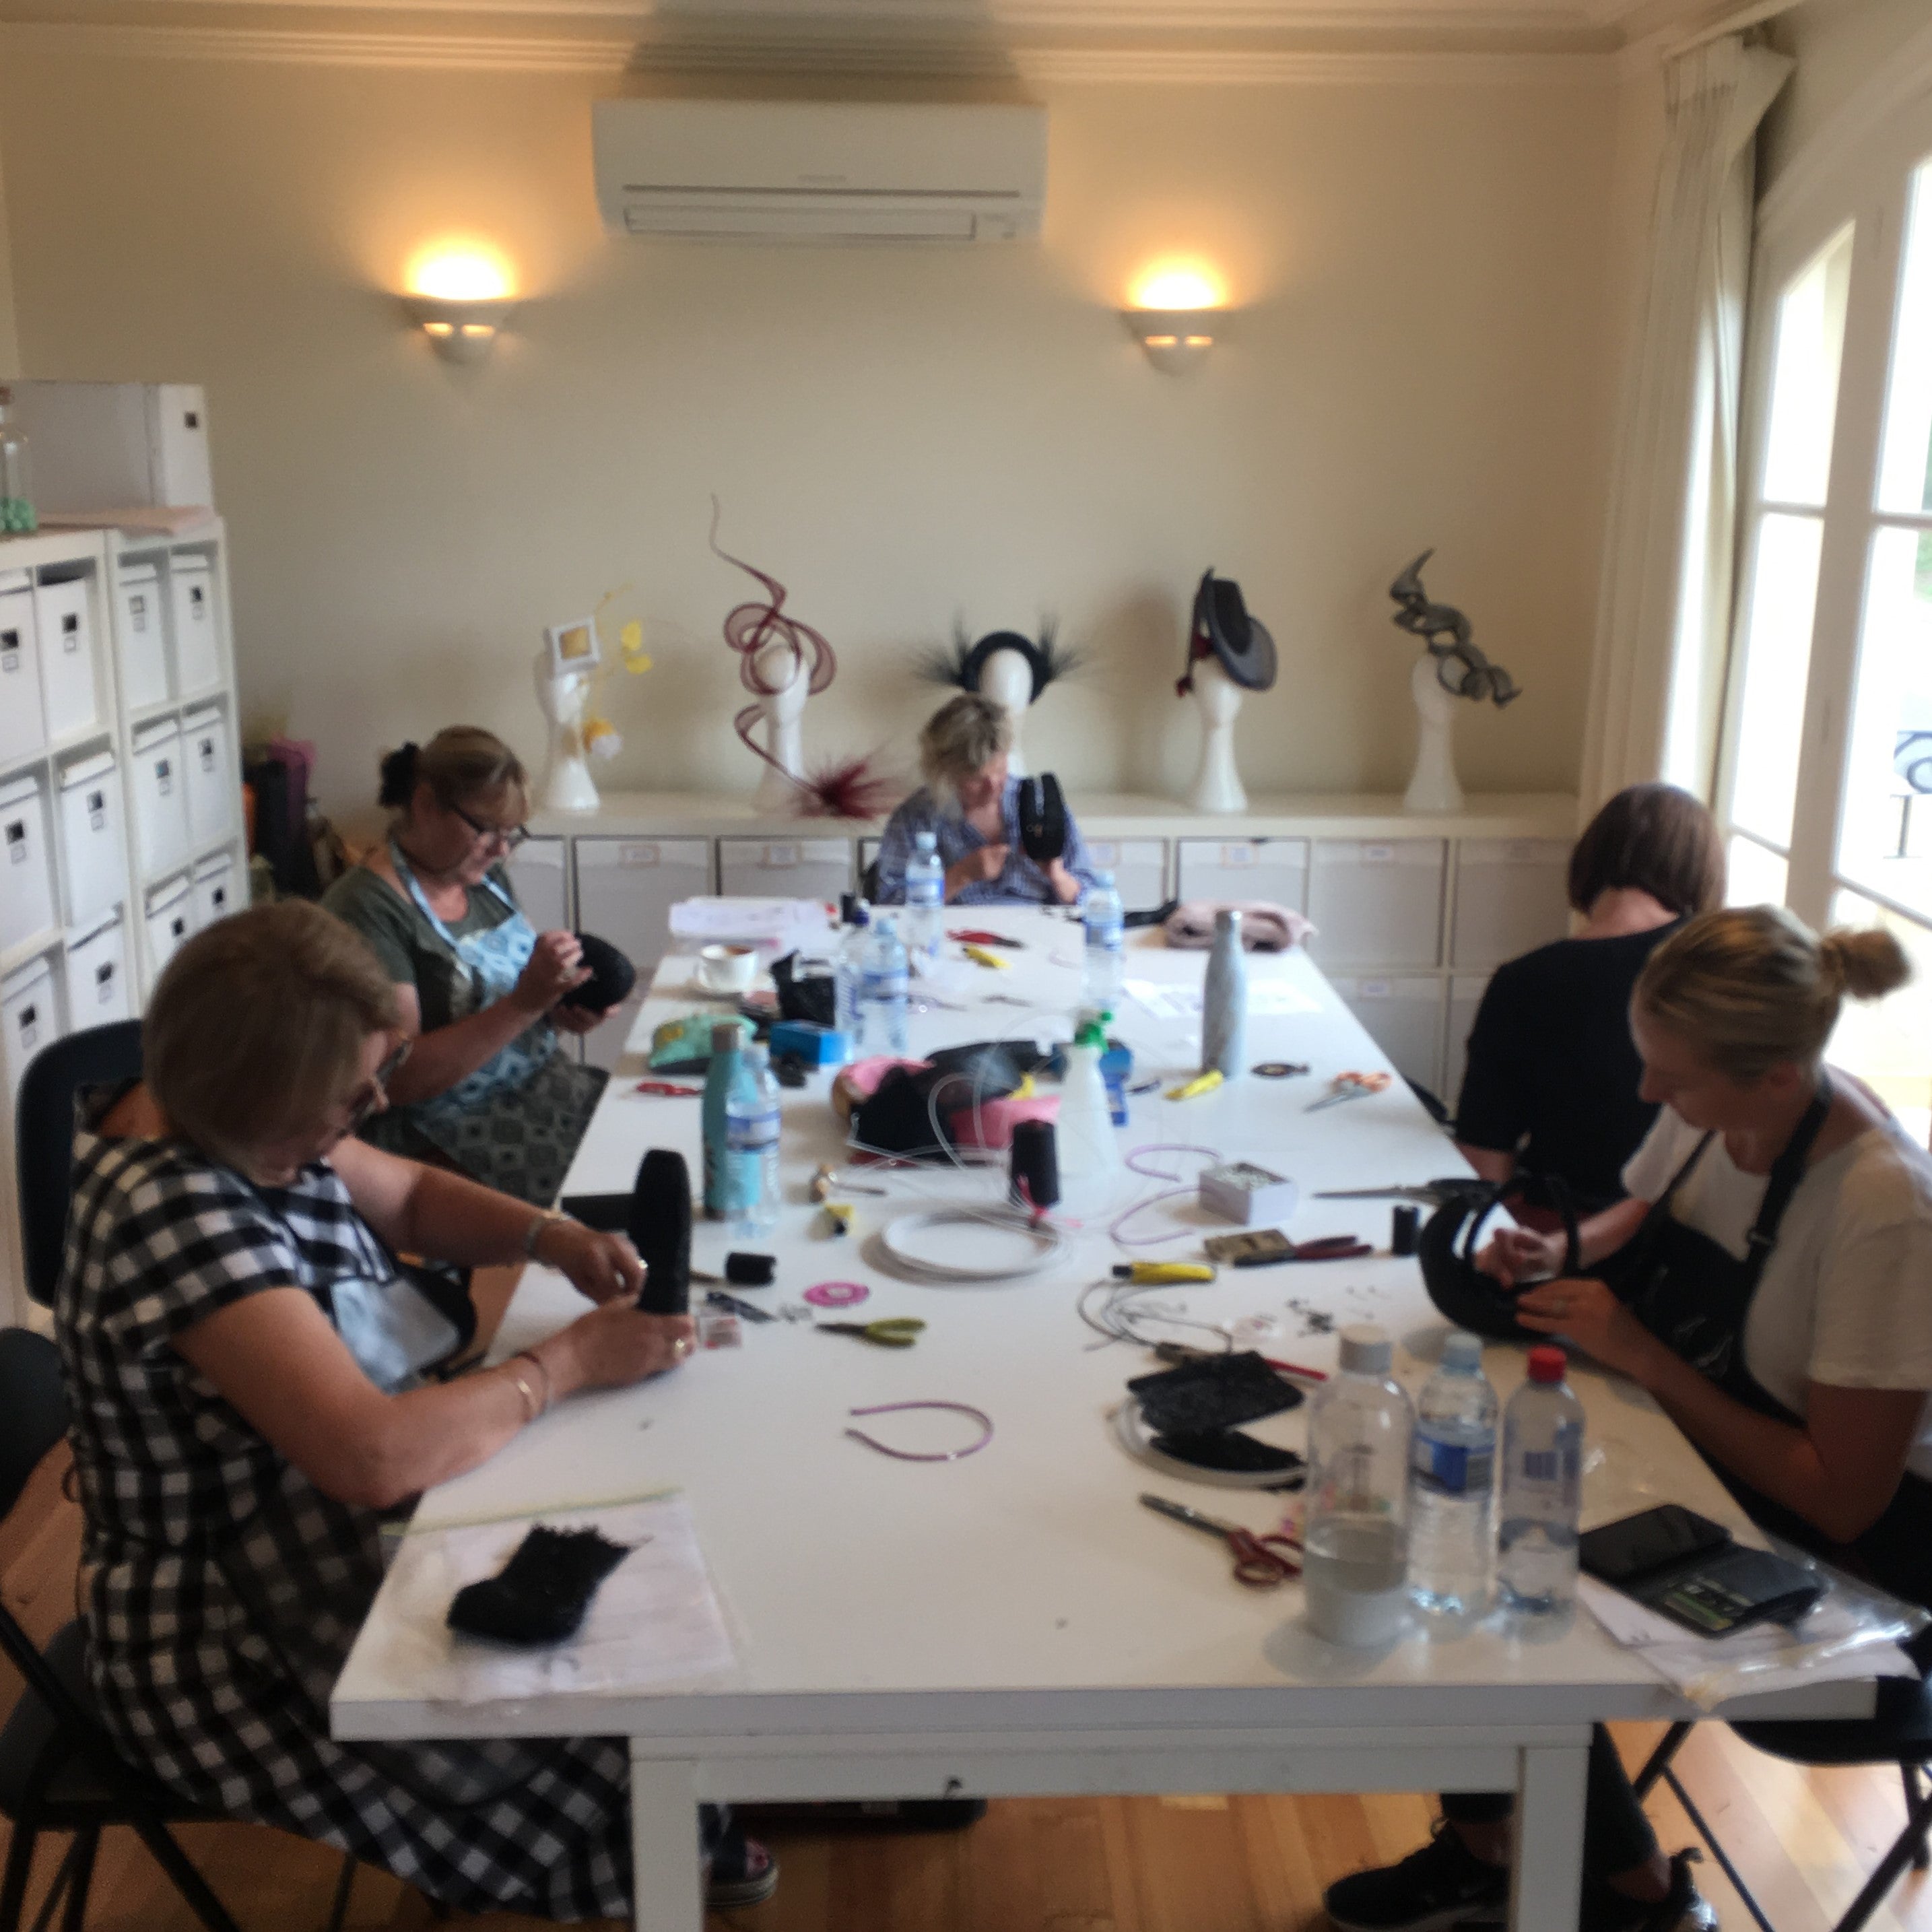 Students working at a white table in a millinery workshop learning how to make hats